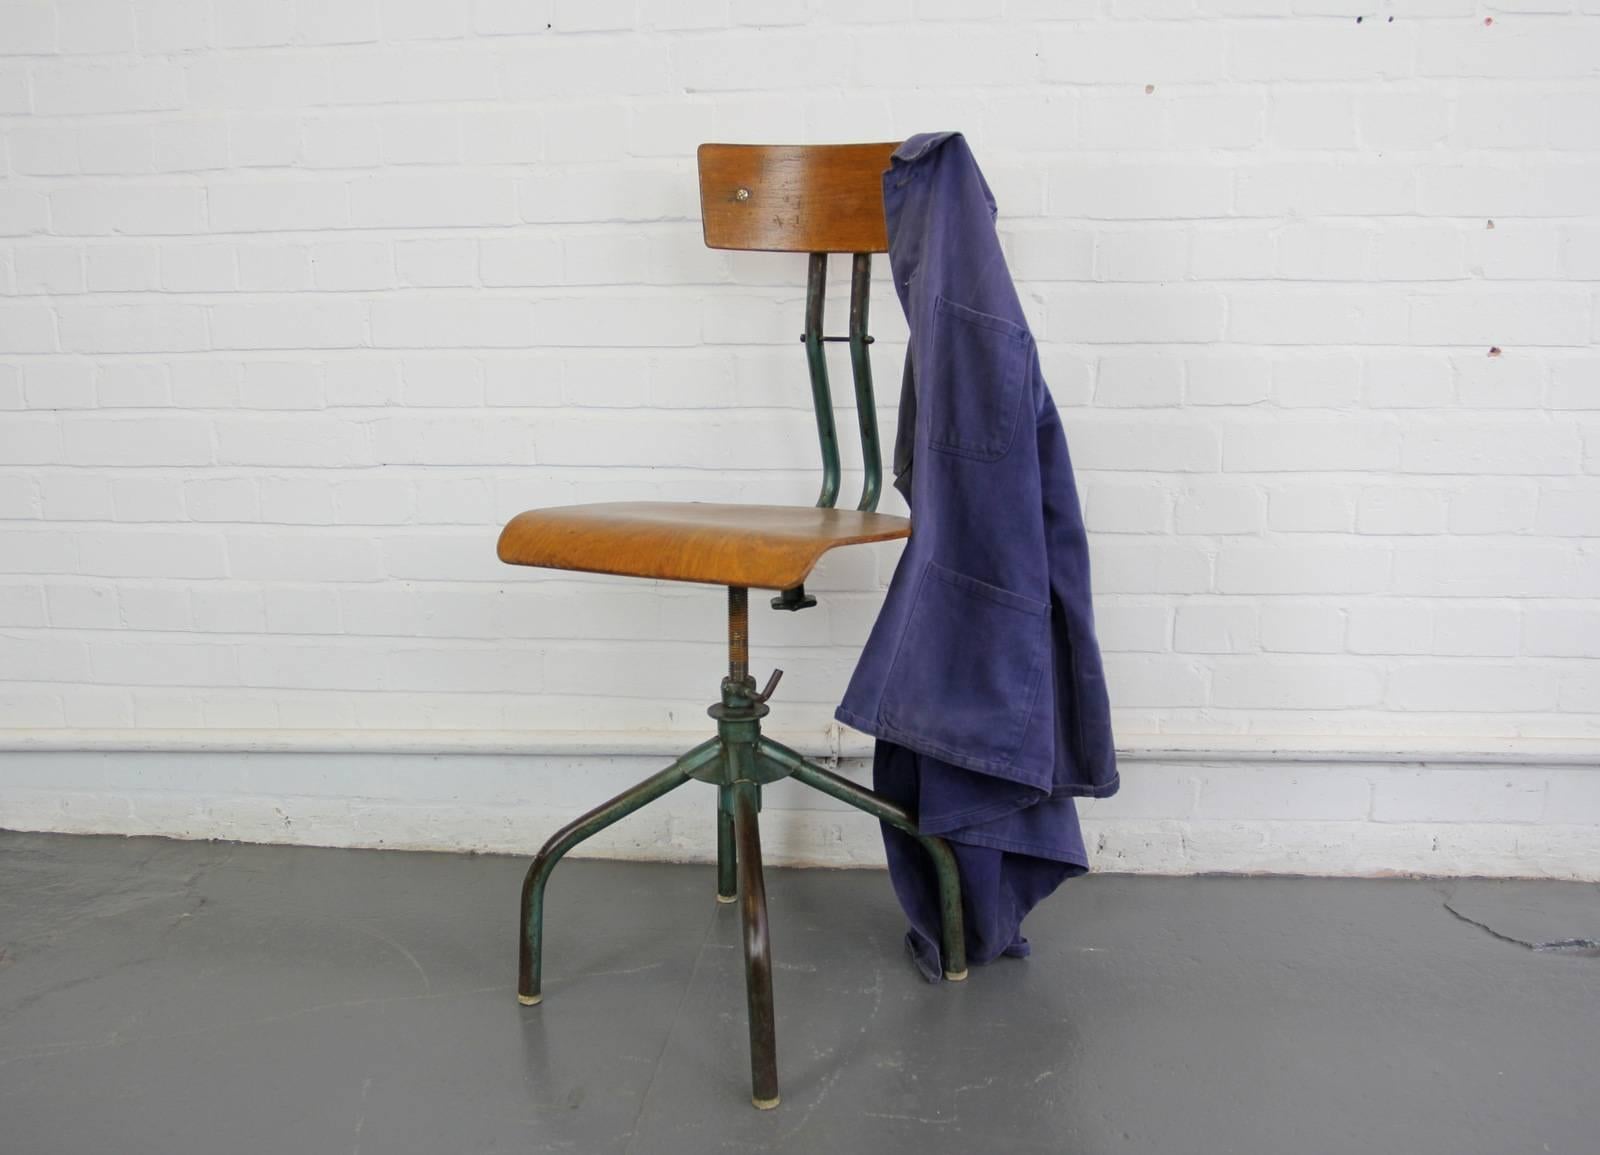 French industrial machinists chair, circa 1950s

Product code #OA515

- Height adjustable
- Sprung seat and backrest
- Shaped ply seat and backrest
- Swivels 360
- French, circa 1950s
- Measures: L 38cm wide x 45cm deep x 96cm tall
- 56cm